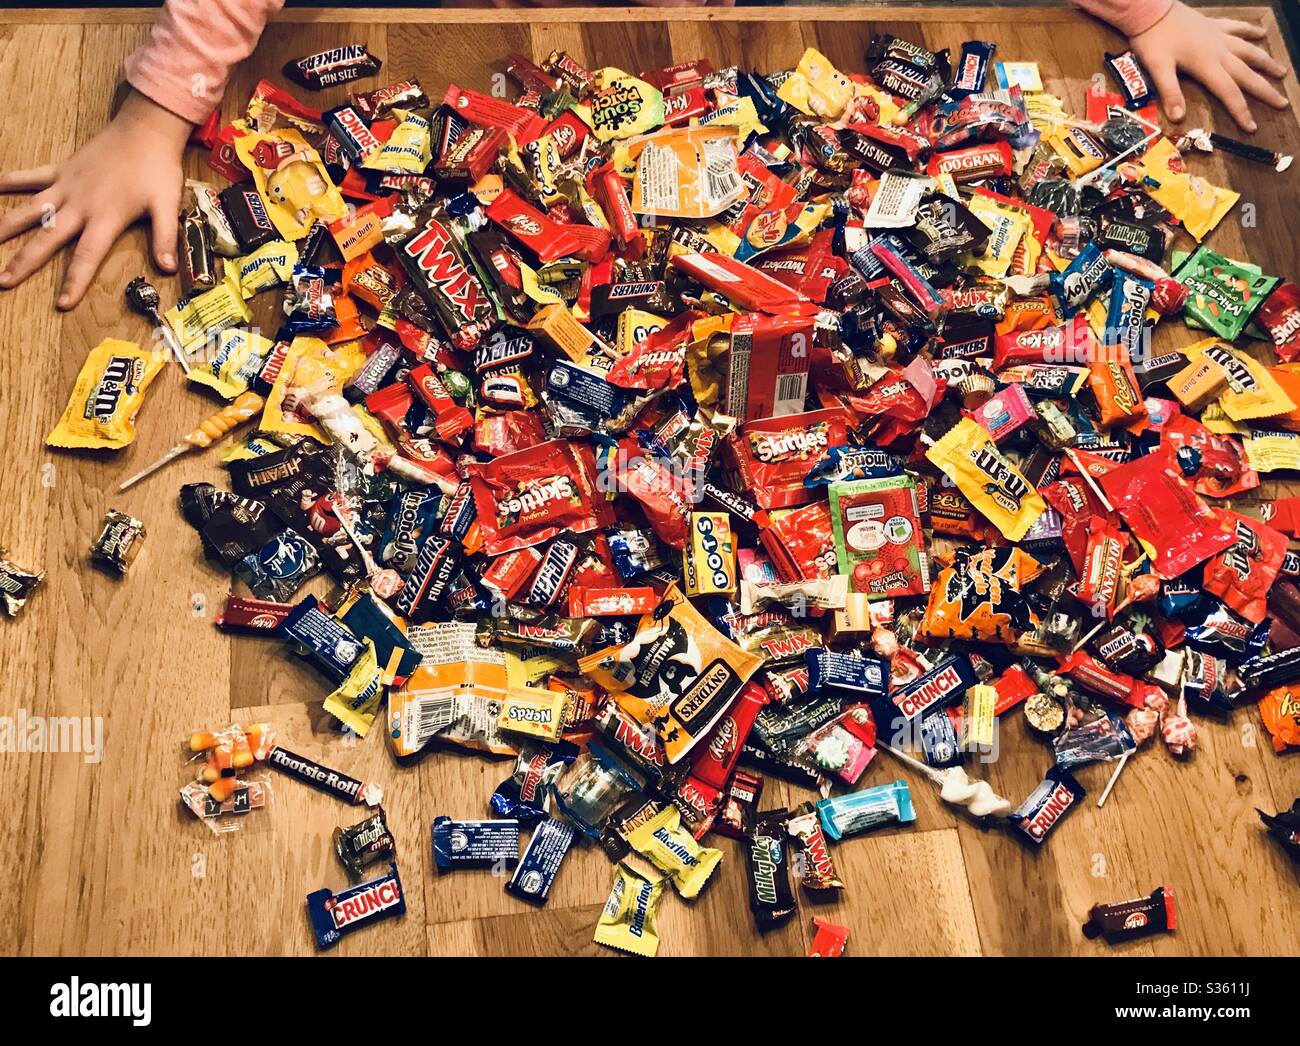 A kid looks over a huge pile of candy on a table. Stock Photo